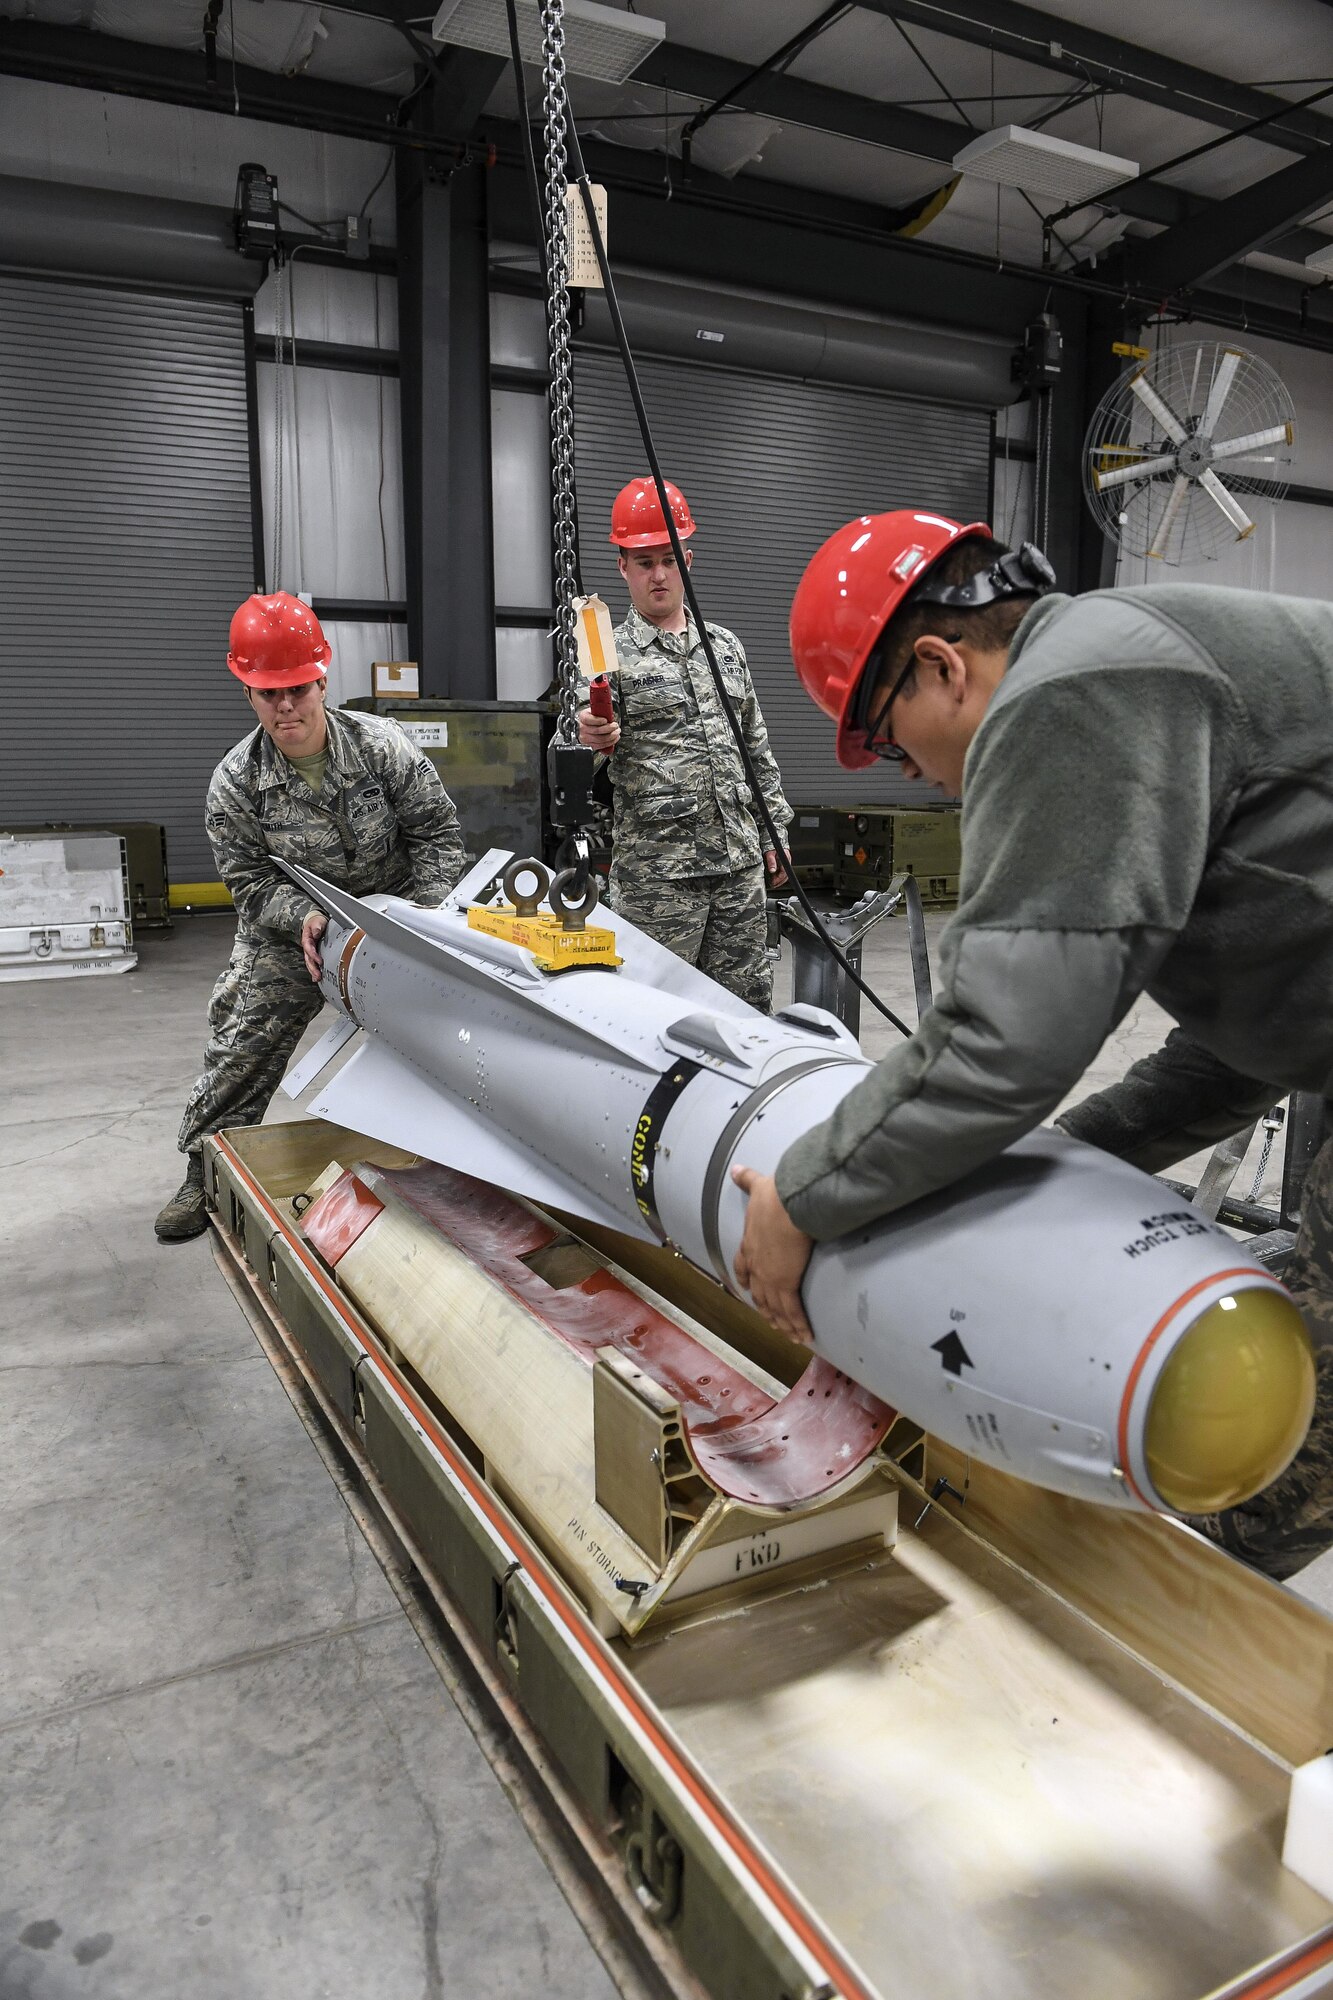 Airmen from 23rd Equipment Maintenance Squadron, Moody Air Force Base, Georgia, load an AGM-65 Maverick air-to-surface guided missile into a shipping container after it passed a tracking function test April 26 at Hill Air Force Base, Utah. Pictured from the left are Senior Airman Lauren Smith, Senior Airman Troy Praisner and Senior Airman Kyle Rodriguez. The Airmen participated in Combat Hammer, which is conducted by the 86th Fighter Weapons Squadron. It is an air-to-ground weapons evaluation exercise which collects and analyzes data on the performance of precision weapons and measures their suitability for use in combat. (U.S. Air Force/Paul Holcomb)